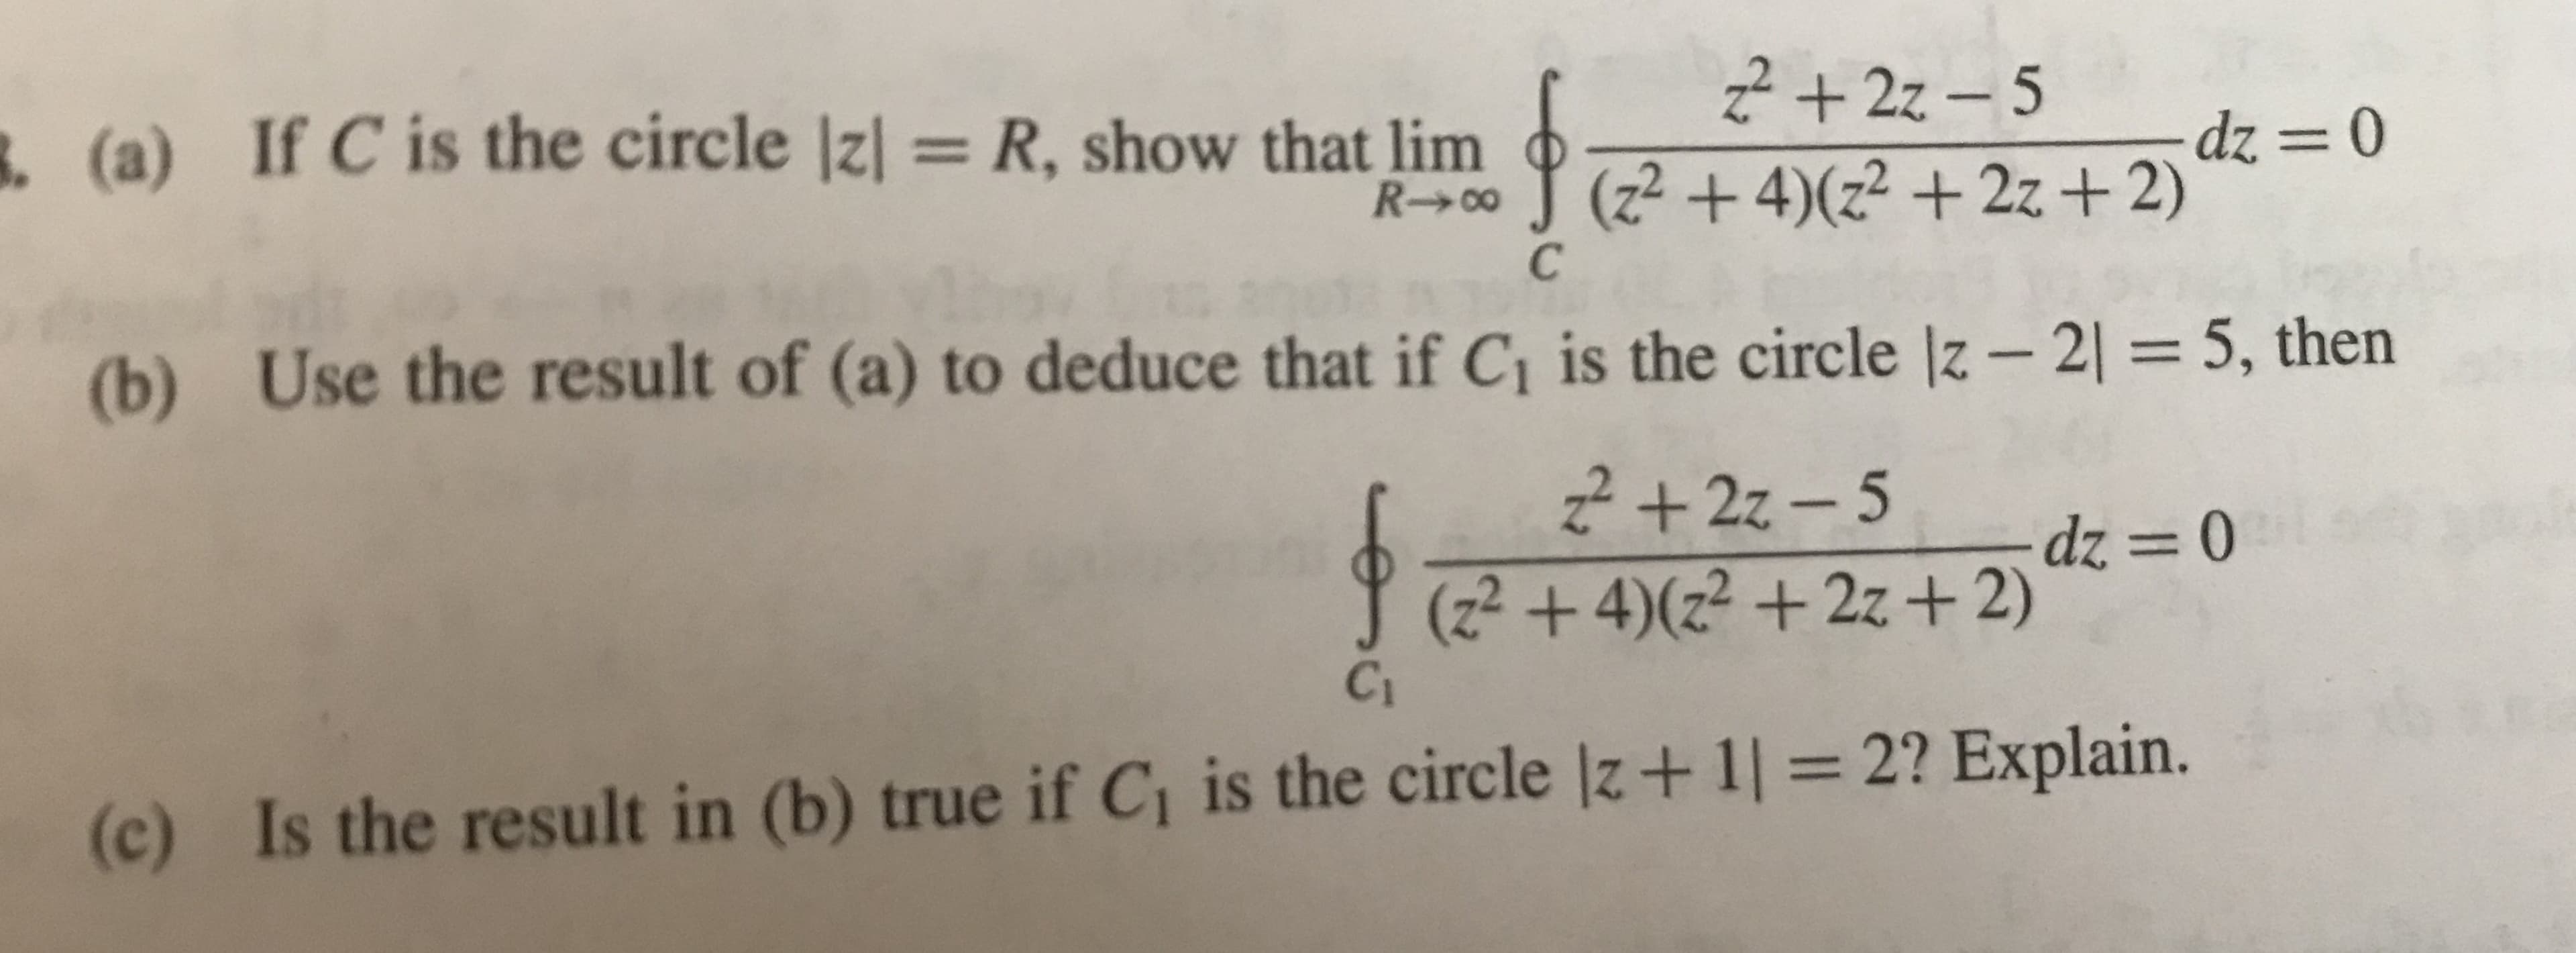 (a)
If C is the circle Izl = R, show that linn (2 + 4)(z2 +22+2)
(b) Use the result of (a) to deduce that if Ci is the circle lz-2
5, then
(2 +42 +2z+2)
Ci
(c)
Is the result in (b) true if Ci is the circle lz+1l 2? Explain.
